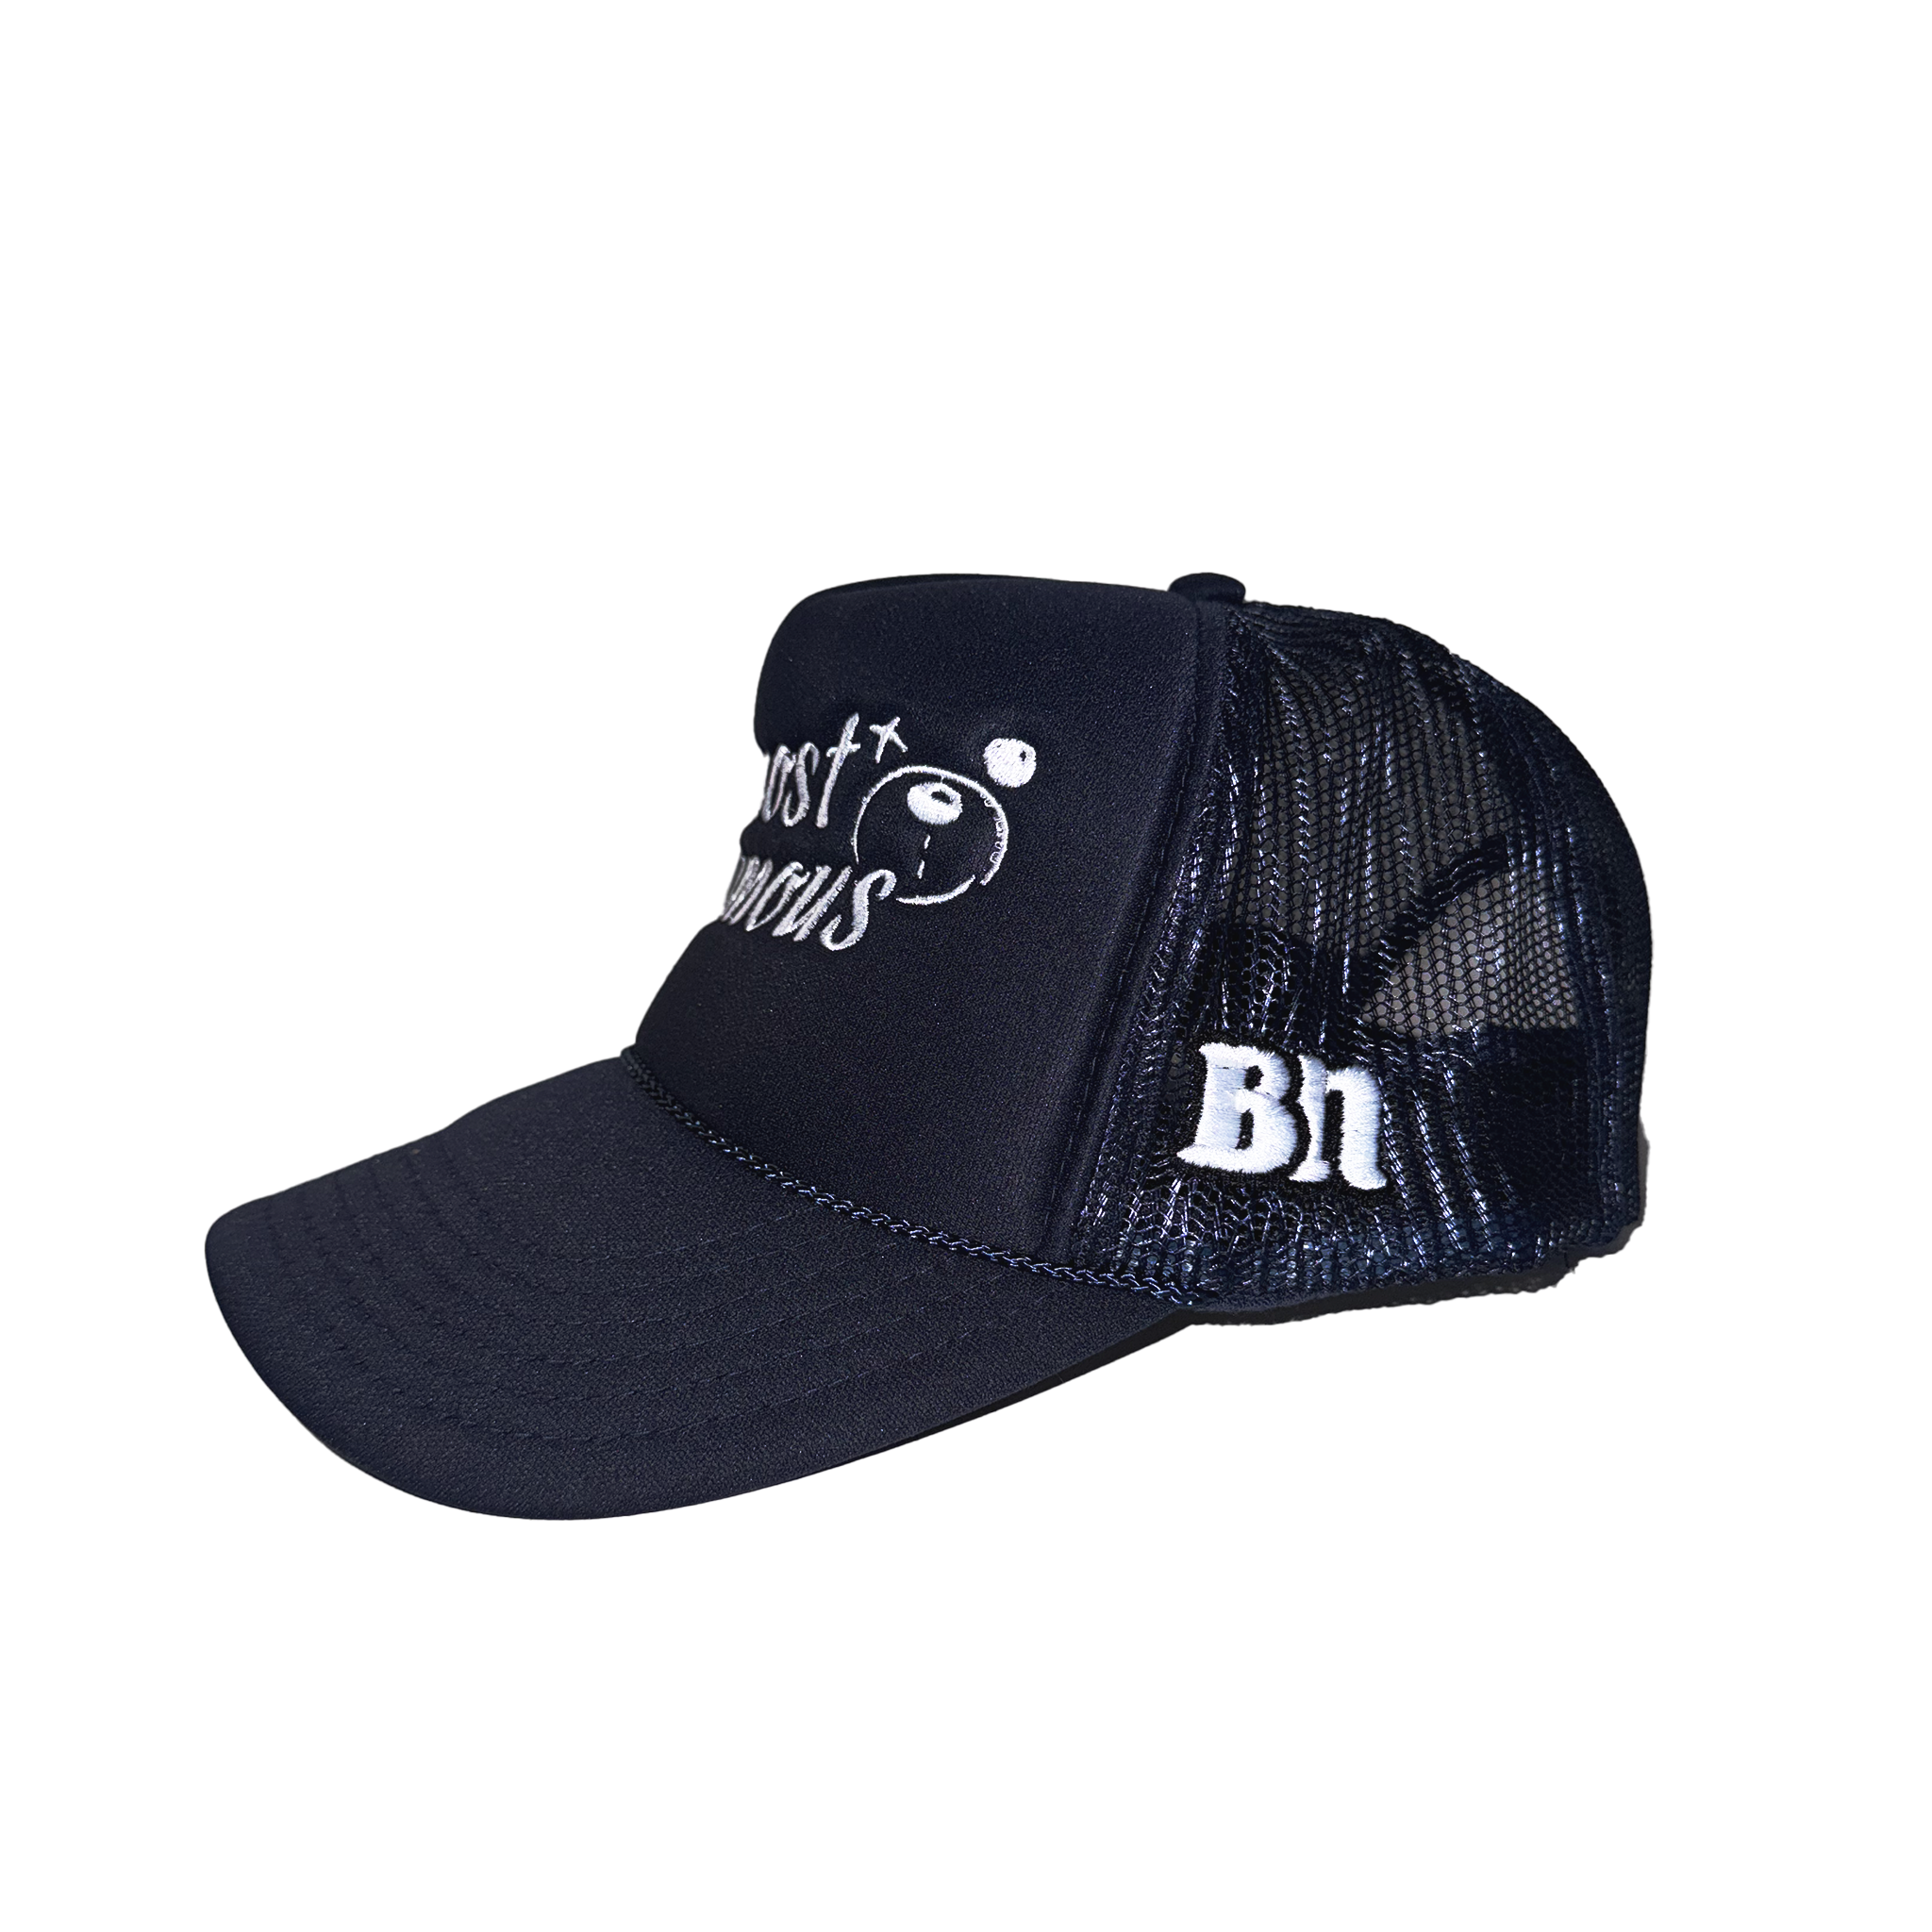 A black Almost Famous Trucker hat with a mesh back featuring a cartoon bear design and the text "just brows" embroidered on the front by Better not.